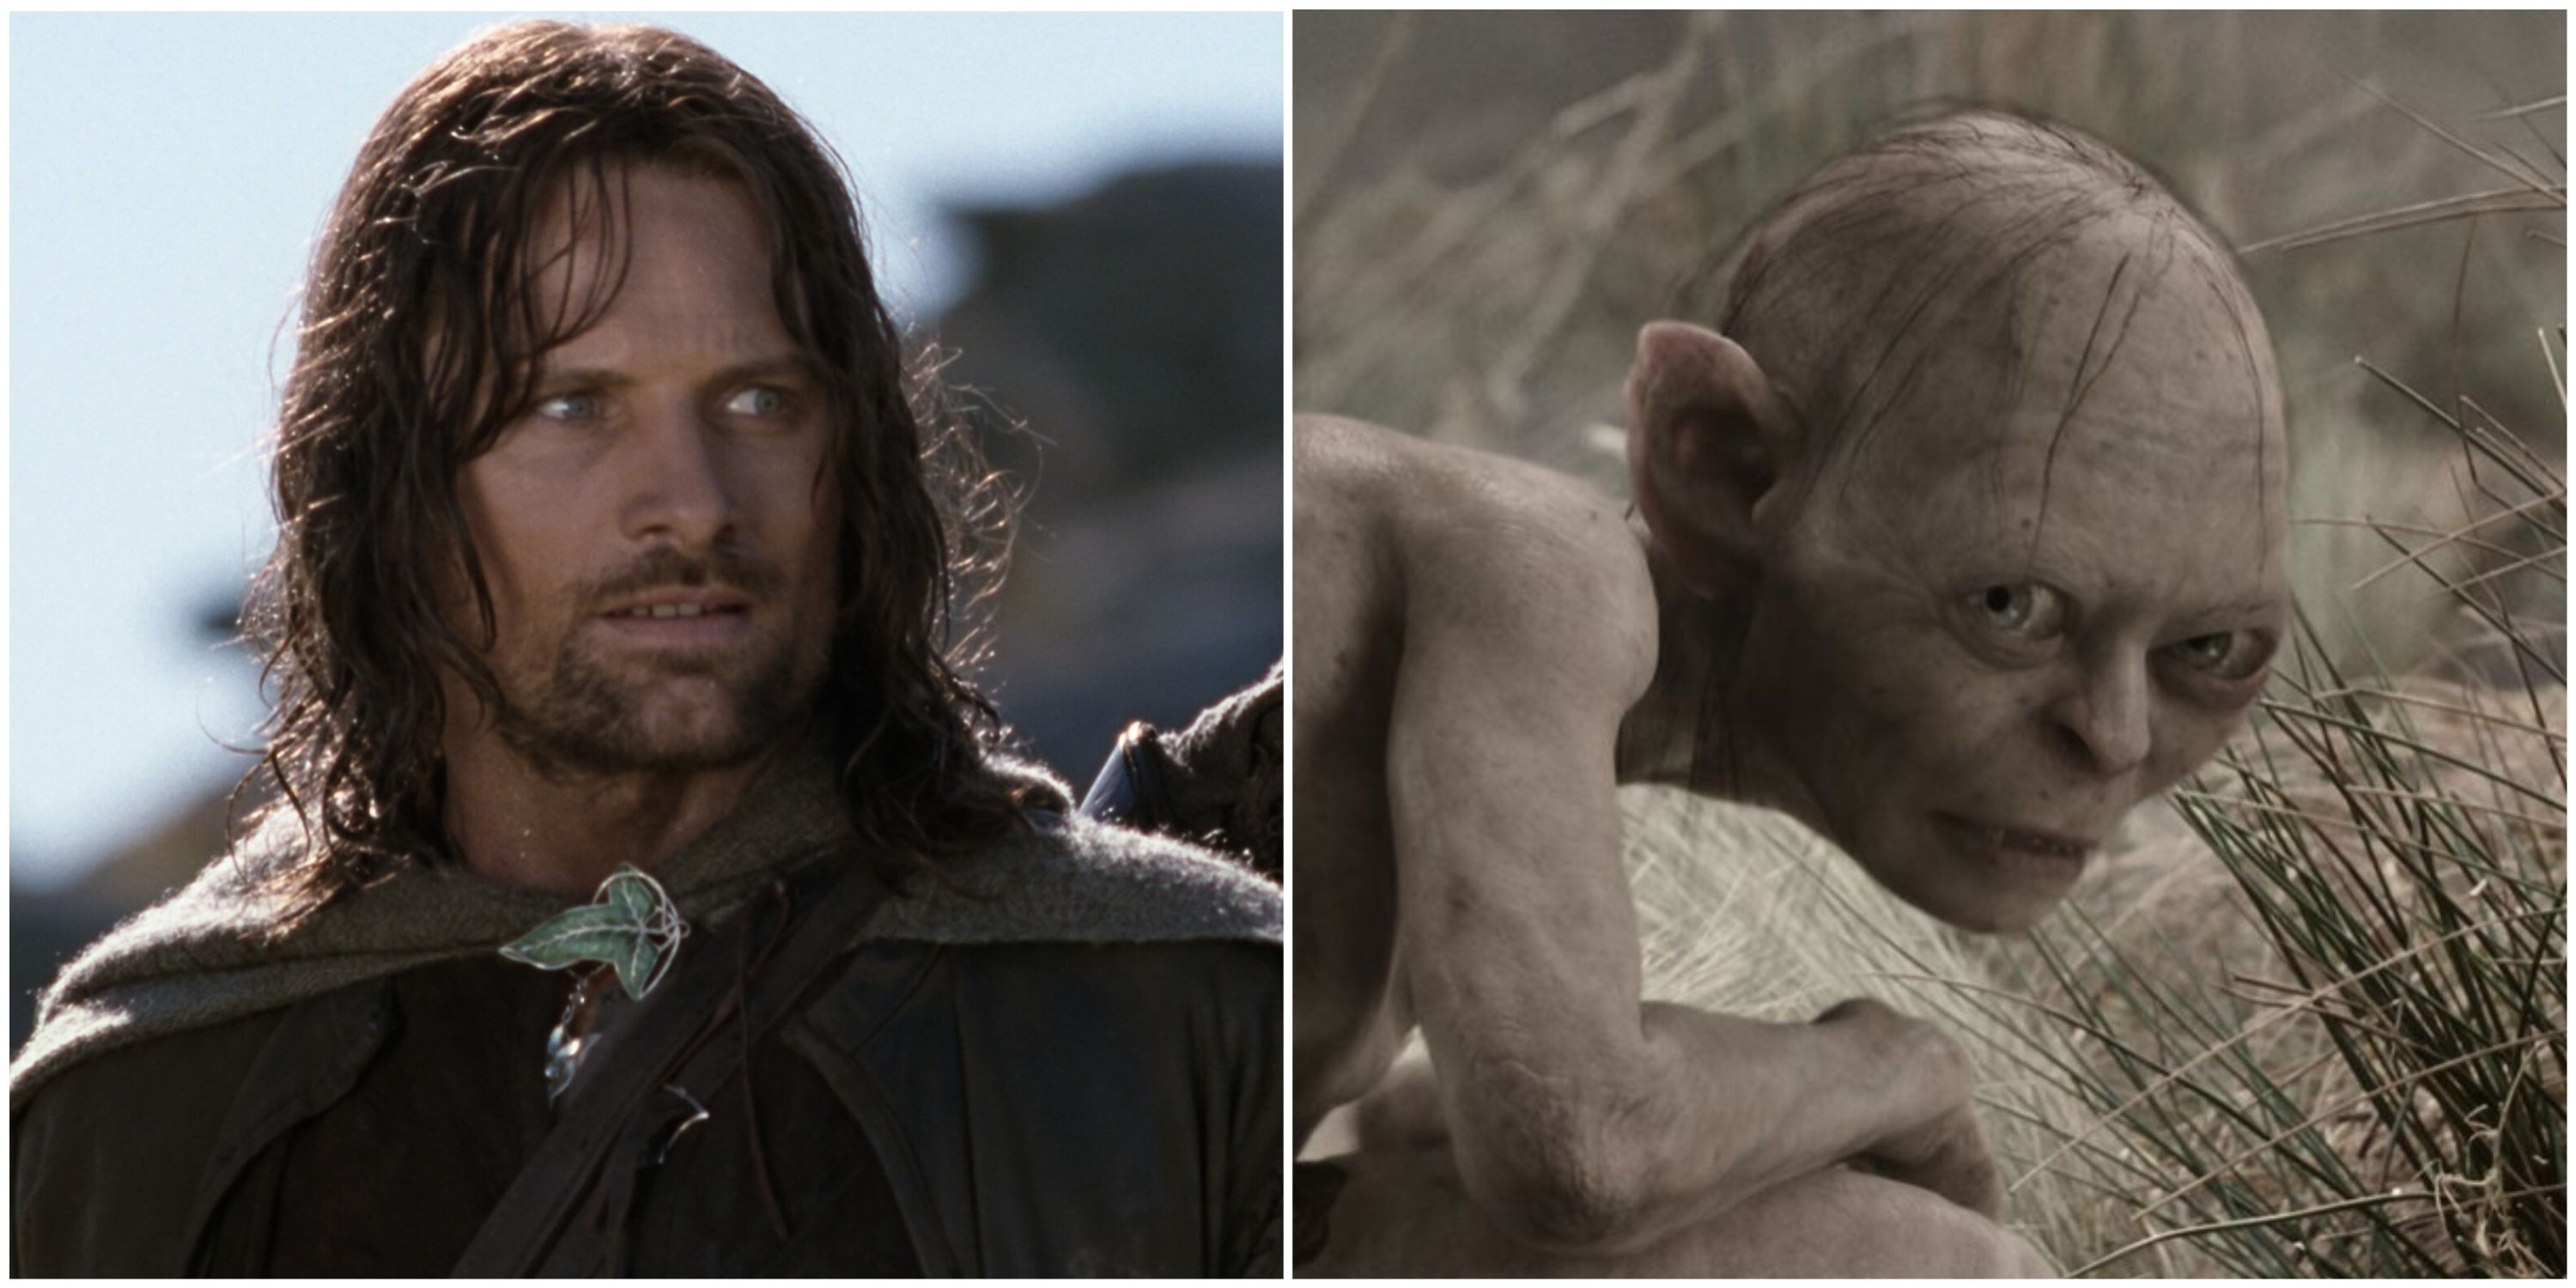 Aragorn and Gollum in The Lord of the Rings: The Two Towers